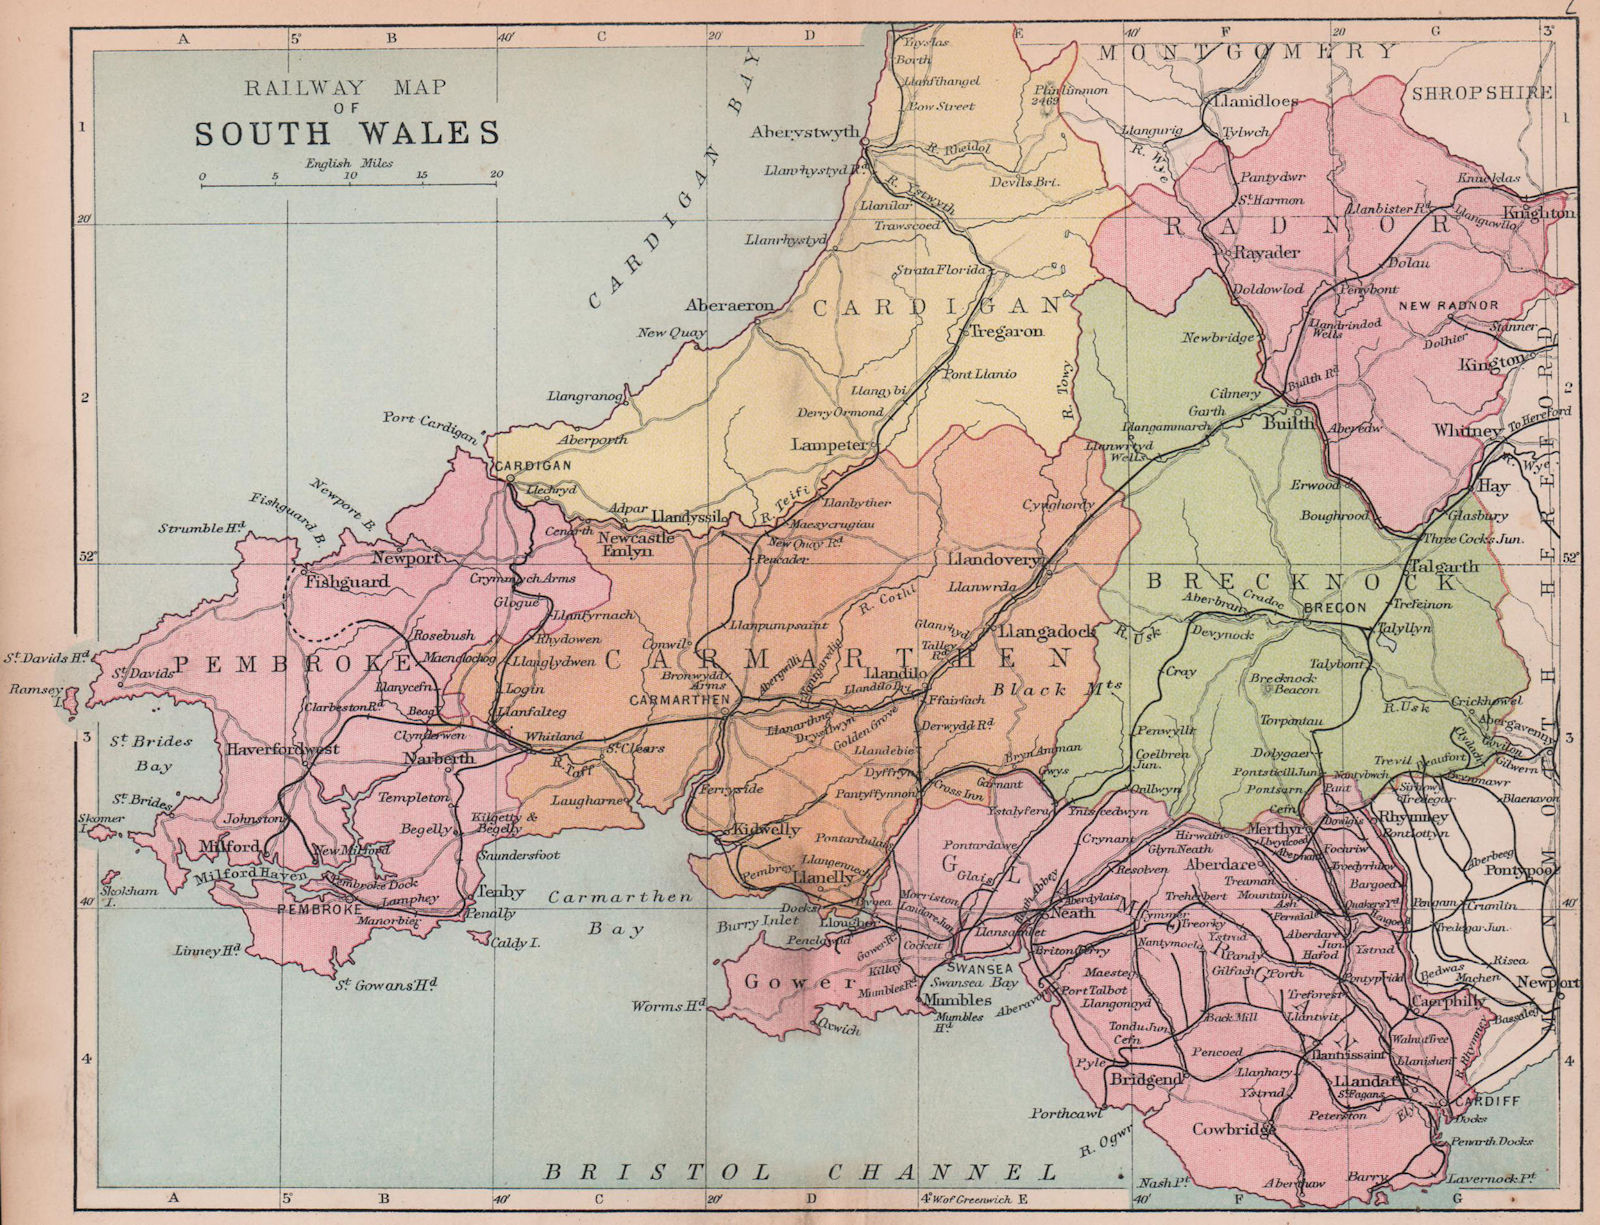 Associate Product WALES Railway Map of South Wales BARTHOLOMEW 1882 old antique plan chart